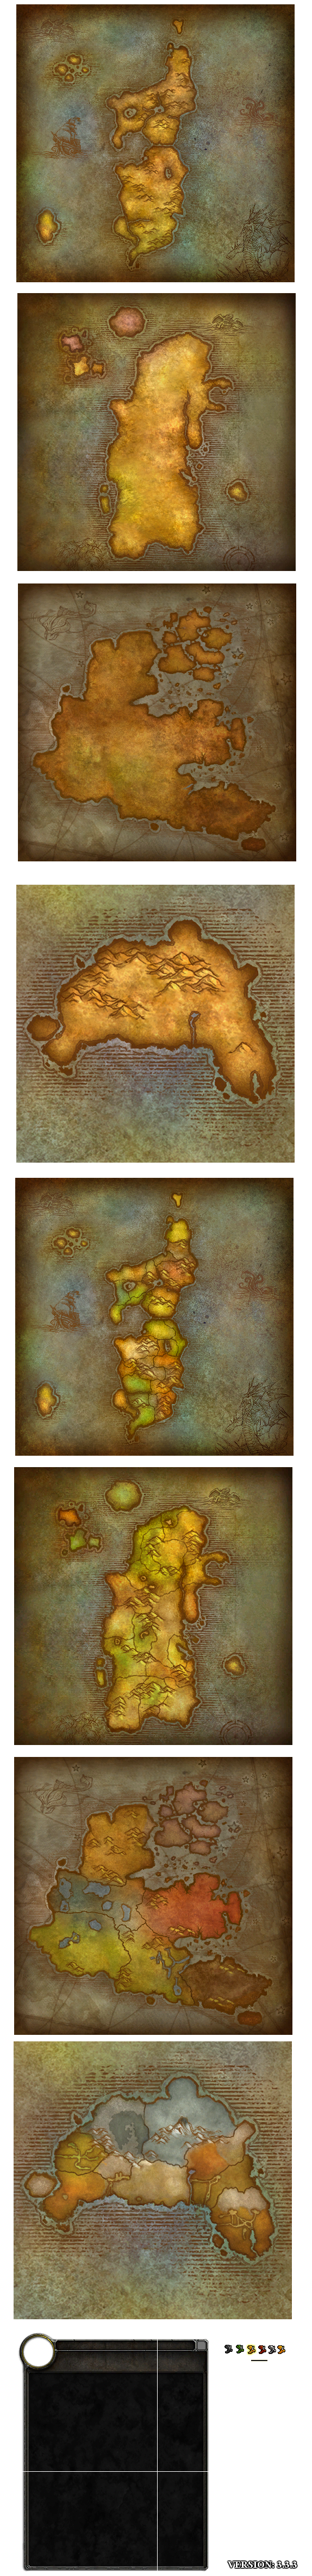 World of Warcraft - Gryphon Map